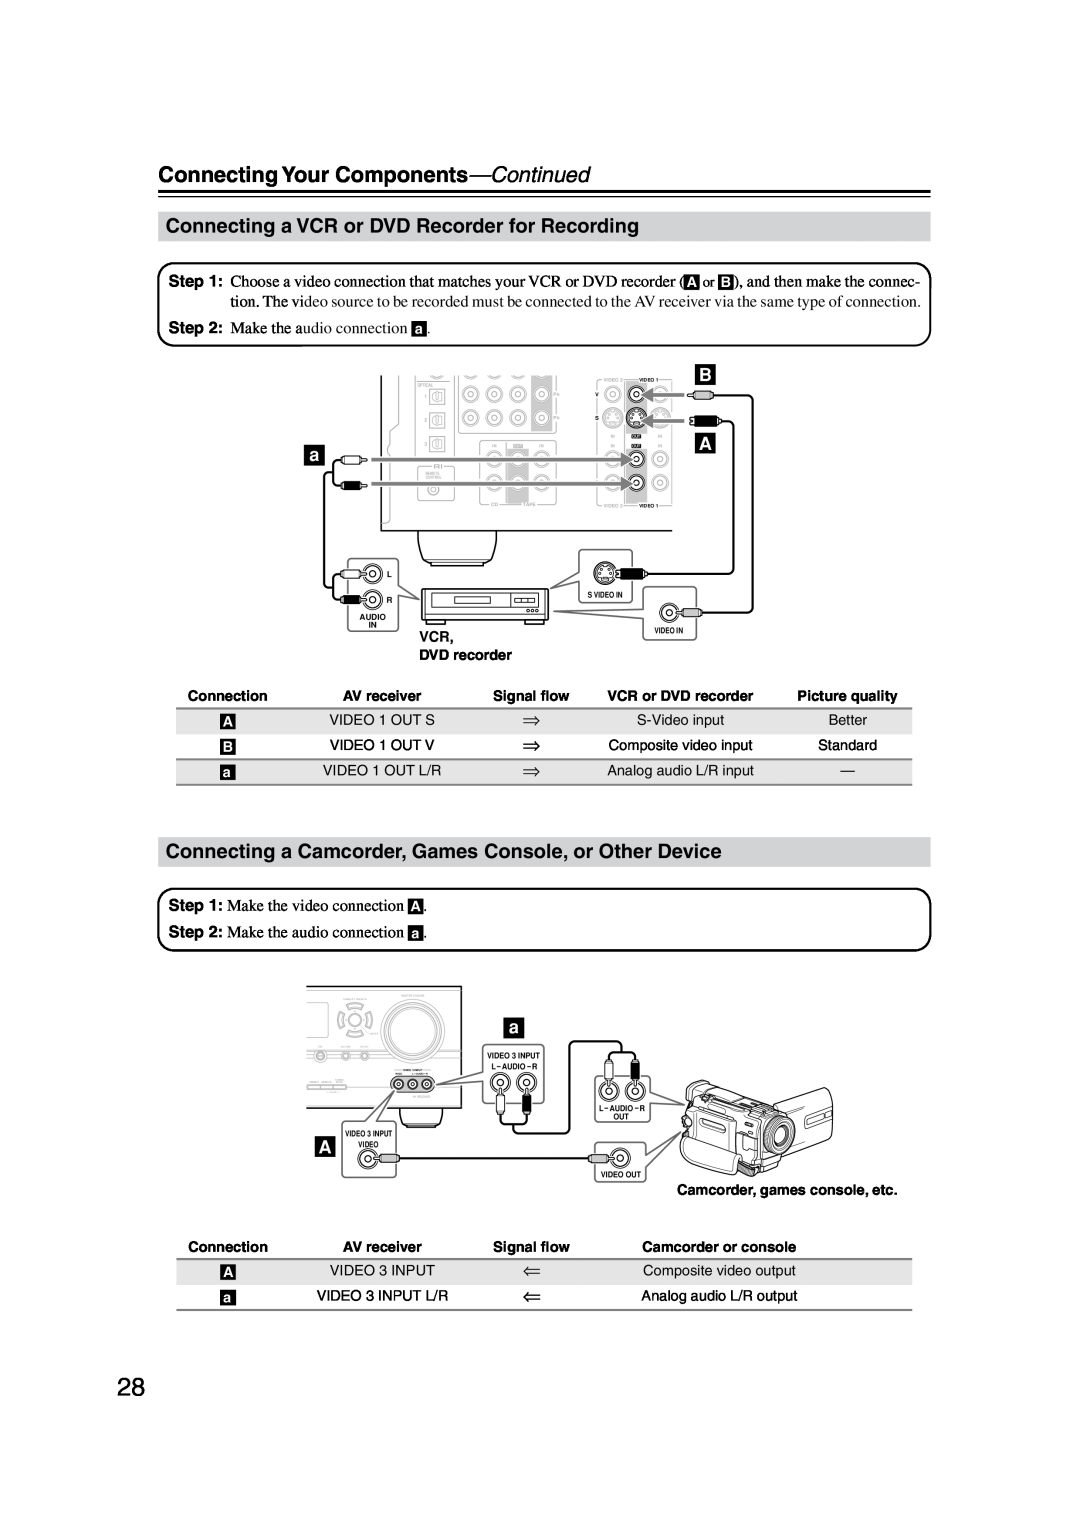 Onkyo HT-S990THX instruction manual Connecting a VCR or DVD Recorder for Recording, Connecting Your Components-Continued 